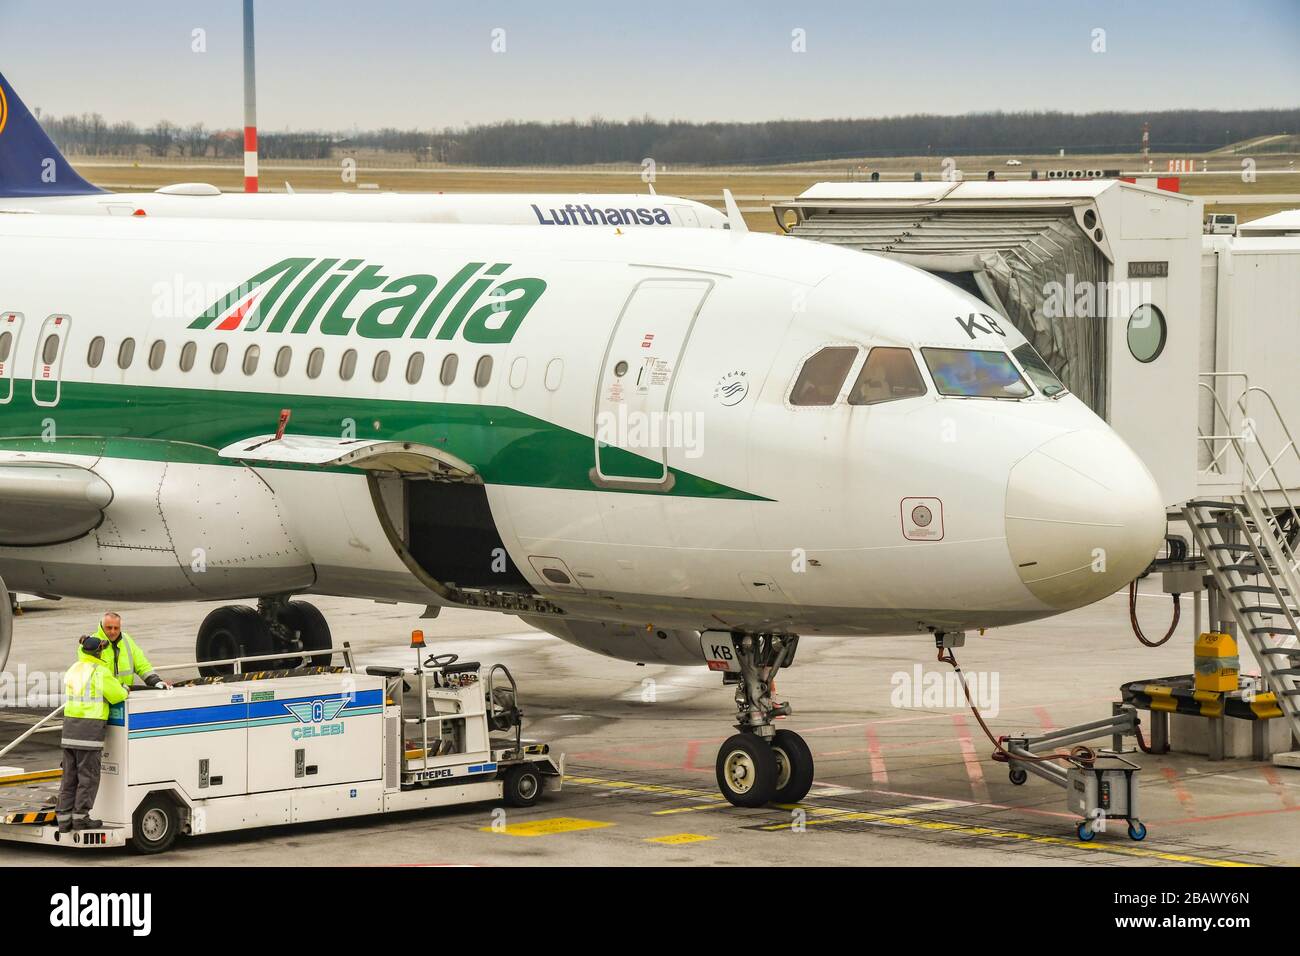 BUDAPEST, HUNGARY - MARCH 2019: Airbus A320 jet operated by Alitalia at Budapest airport. The cargo hold door is open Stock Photo